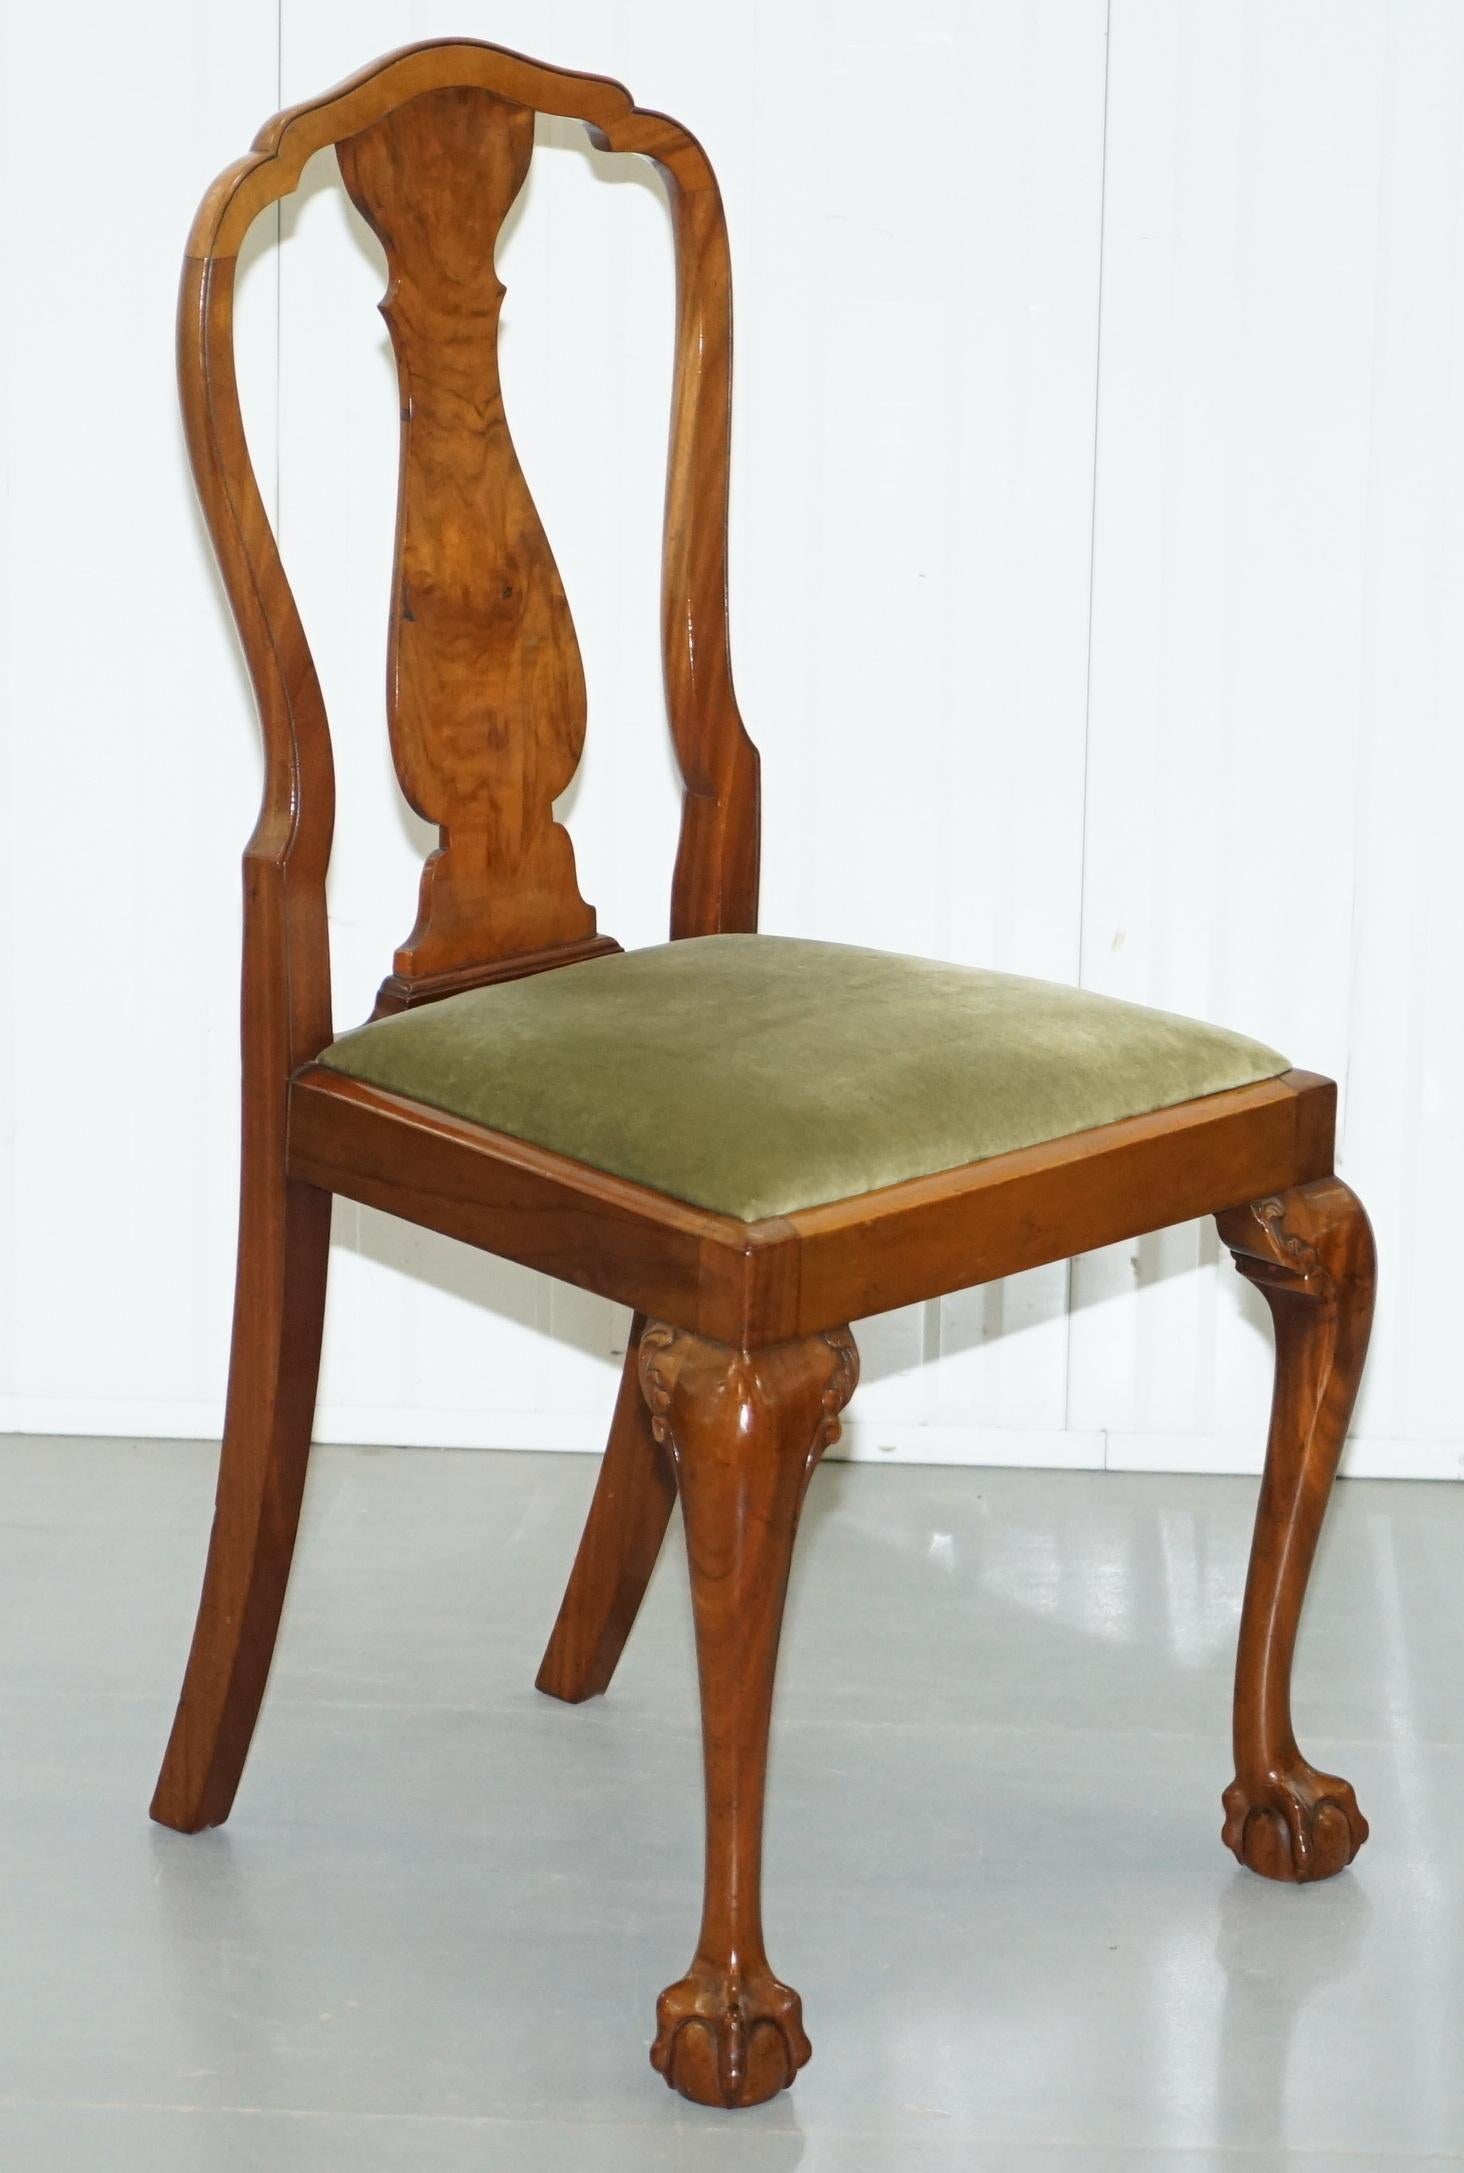 Four Solid Walnut Dining Chairs Claw & Ball Legs, circa 1940 Chippendale Style 4 10